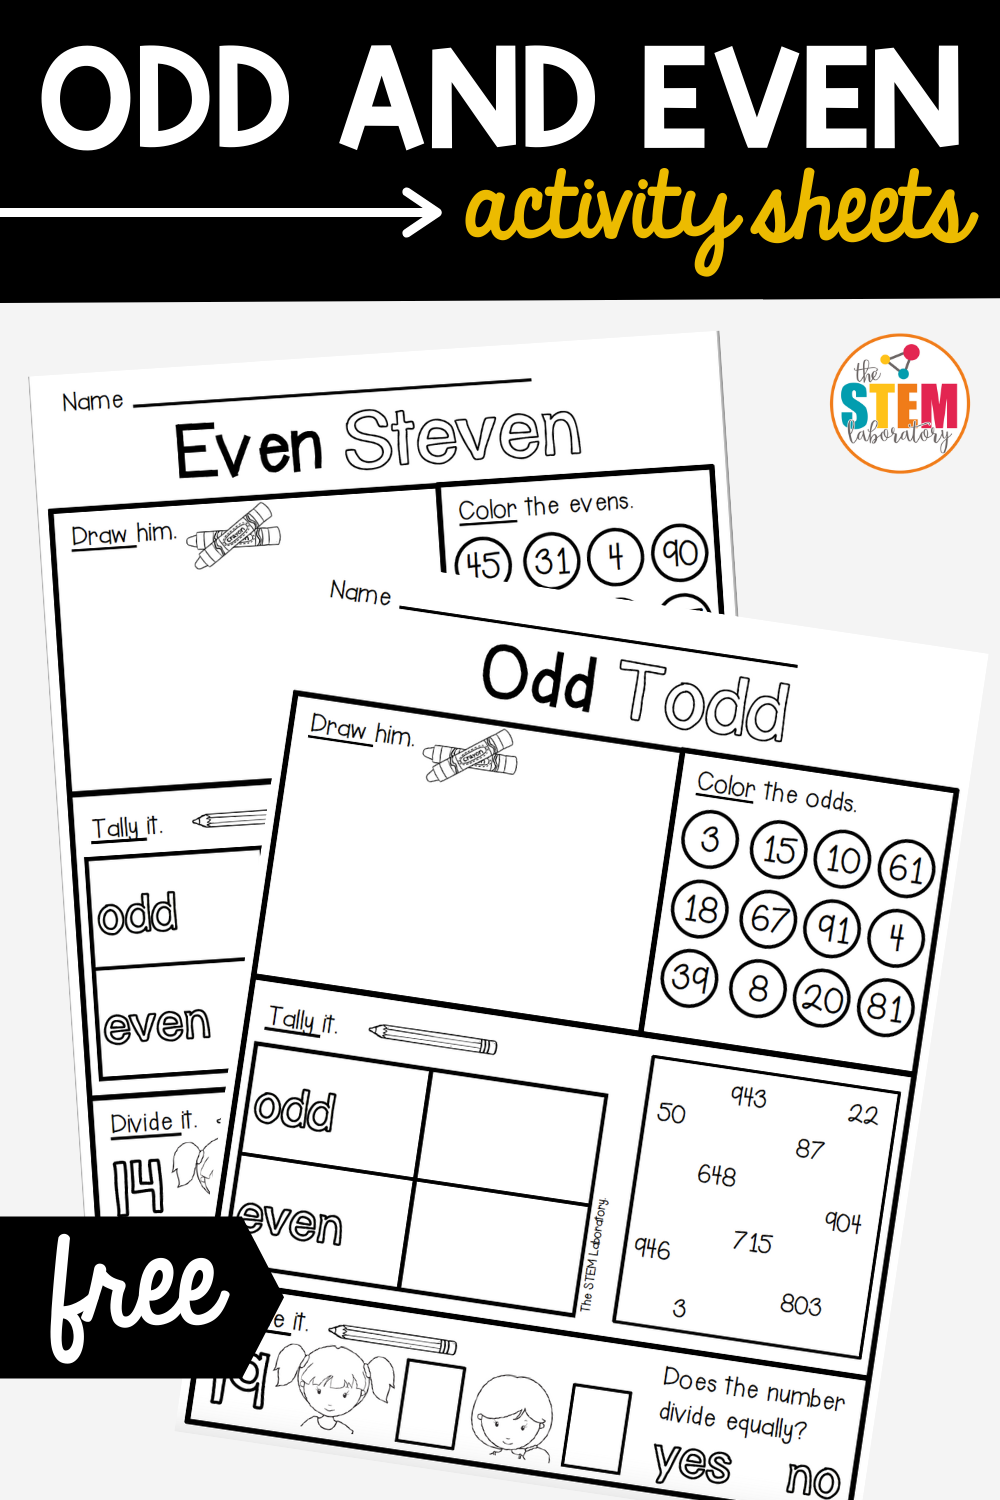 Odd and Even Activity Sheets - The Stem Laboratory With Odds And Even Worksheet